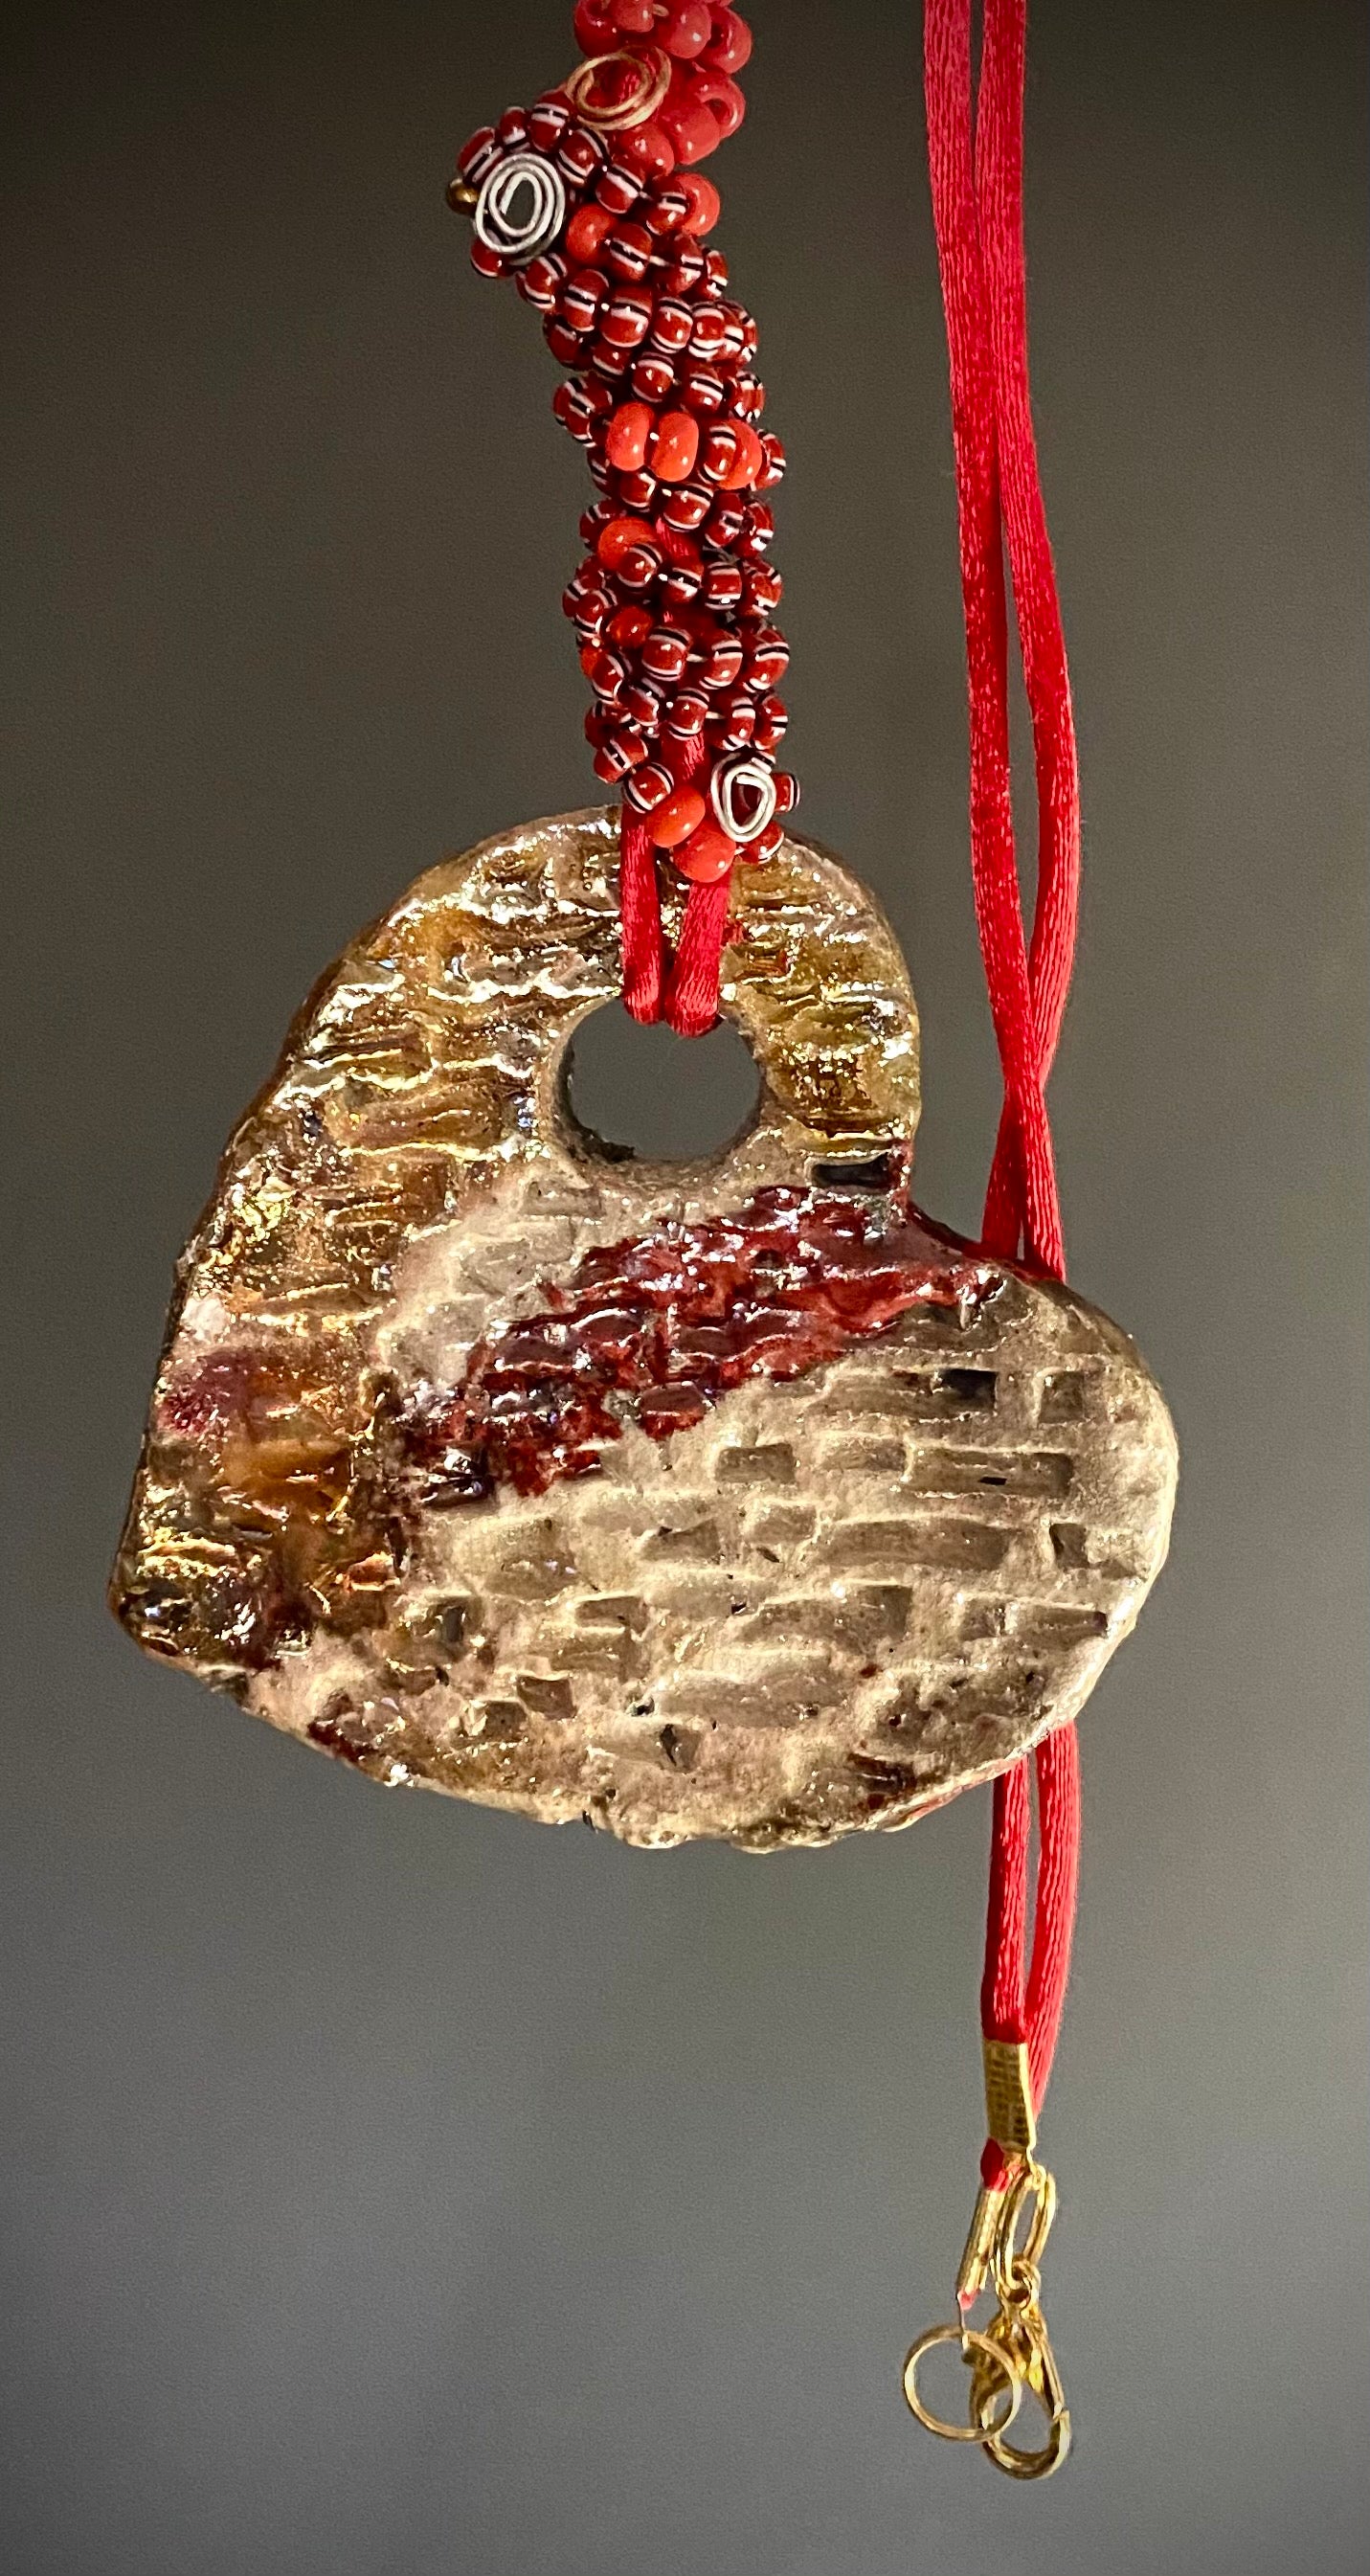 Have A Heart! Each heart pendant is handmade with love! It is 3"x 3"and weighs approx. 3ozs. This pendant has a red, white, and gold metallic raku glazes that renders a unique translucent  patina. The heart has a textured pattern . Both sides are  are different and equally beautiful! It holds a spiral of red and deep purple mini beads on a spiral copper wire. This pendant has a nice 12" red adjustable rattail cord!